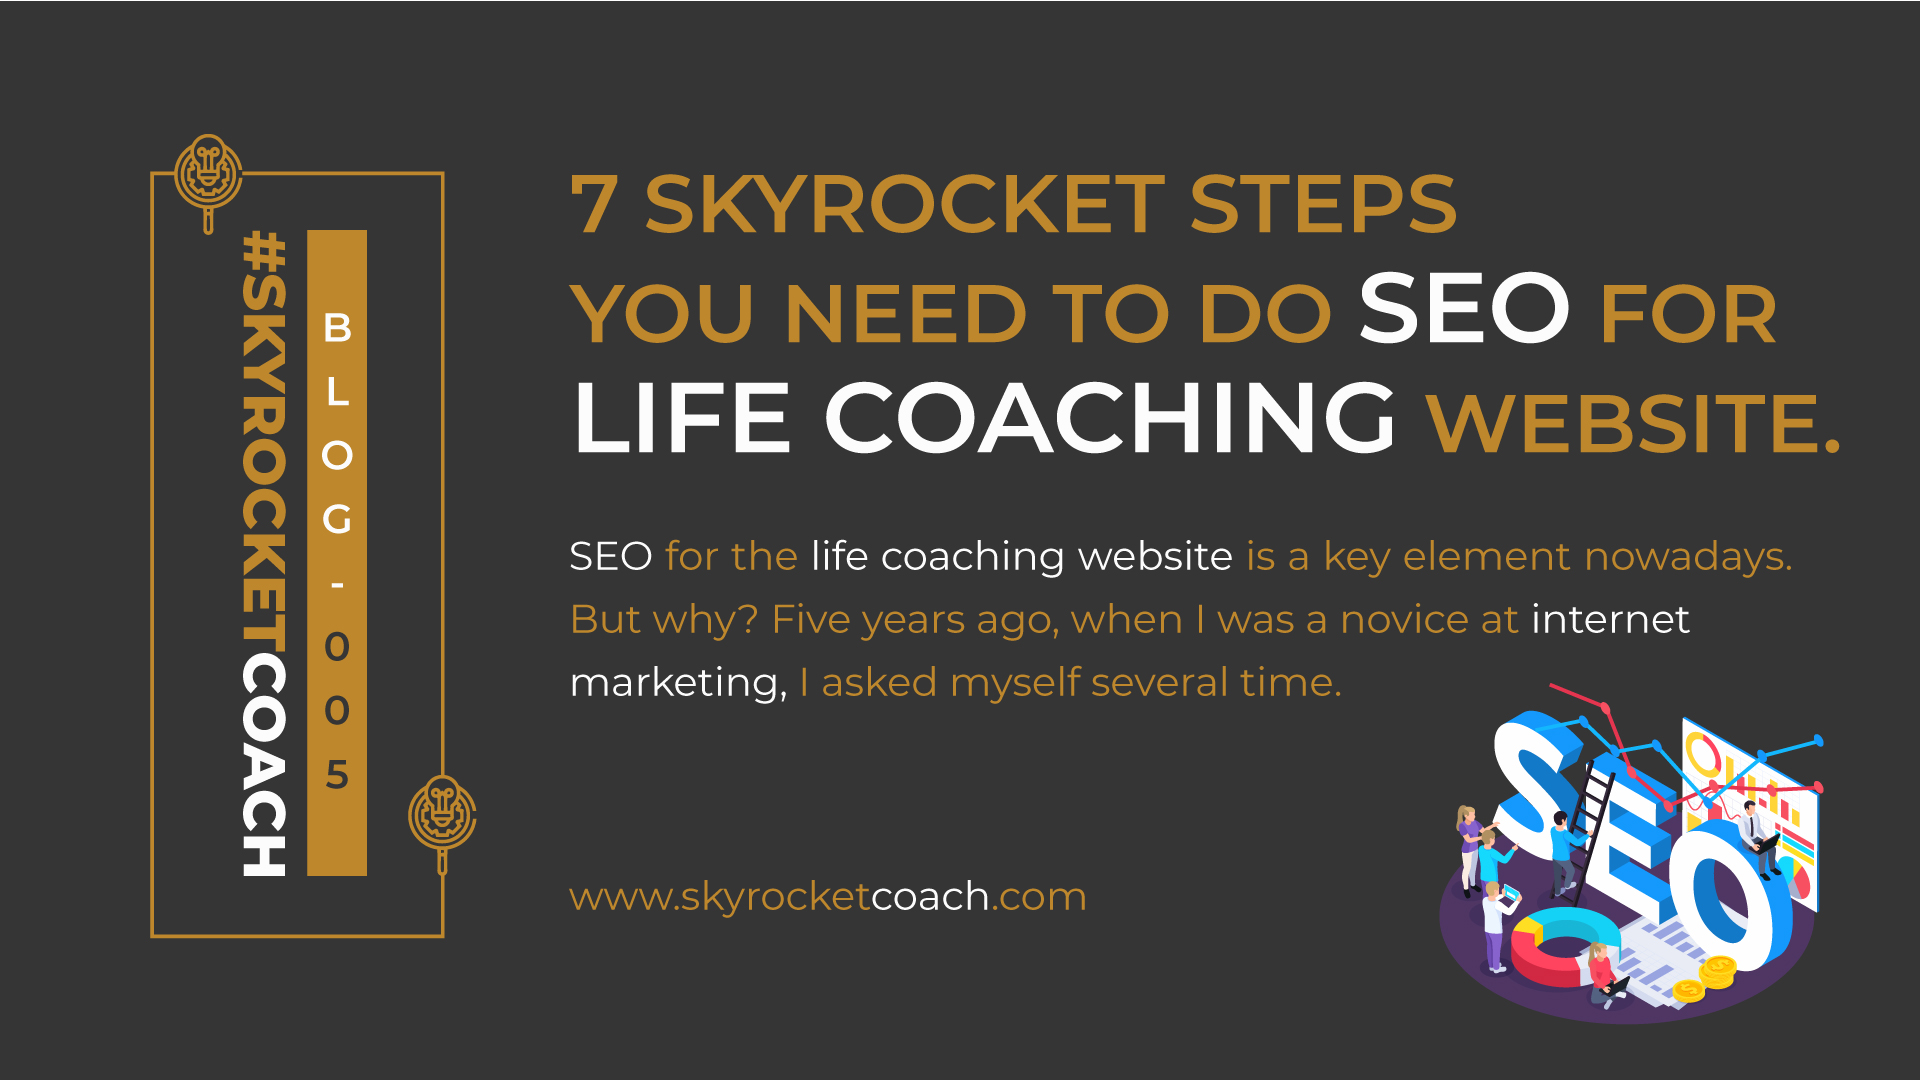 SEO for life coaching website